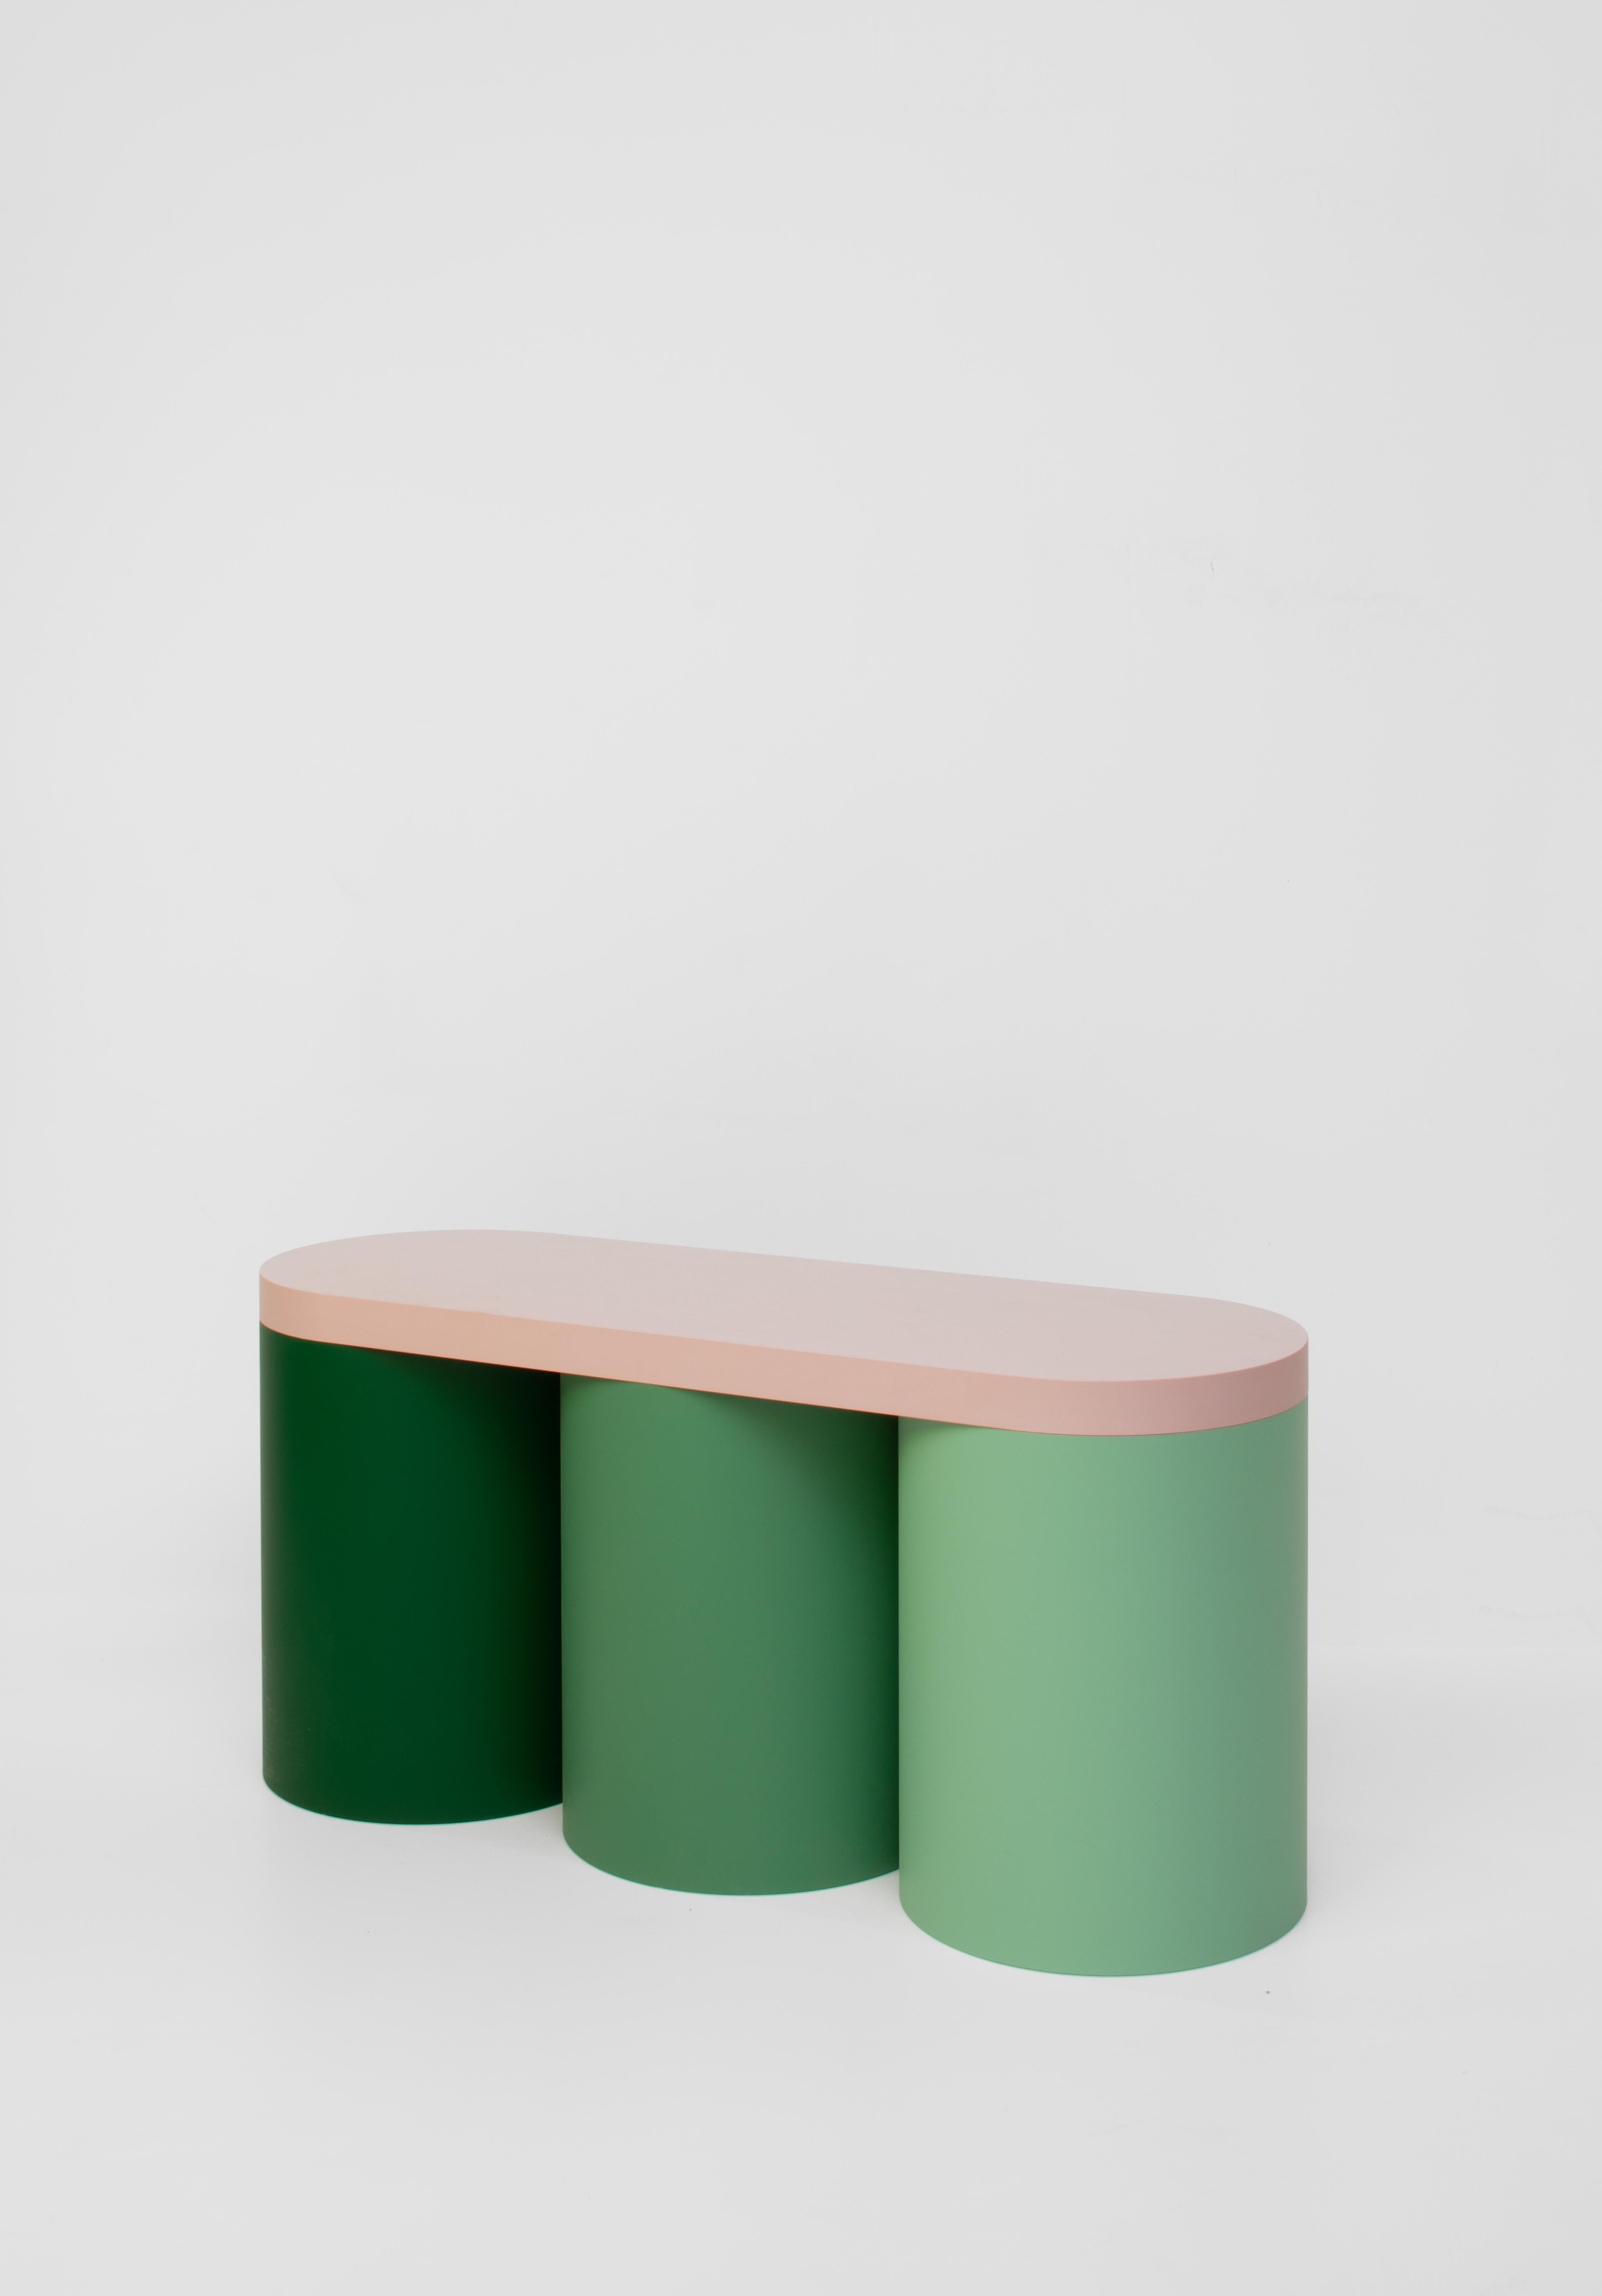 Colourful stool with a contemporary design.
Manufactured in an artisanal way, in which every step of the process is carefully executed. The base of this stool consists of varying numbers of hollow cylinders. It's topped with a slab surface for